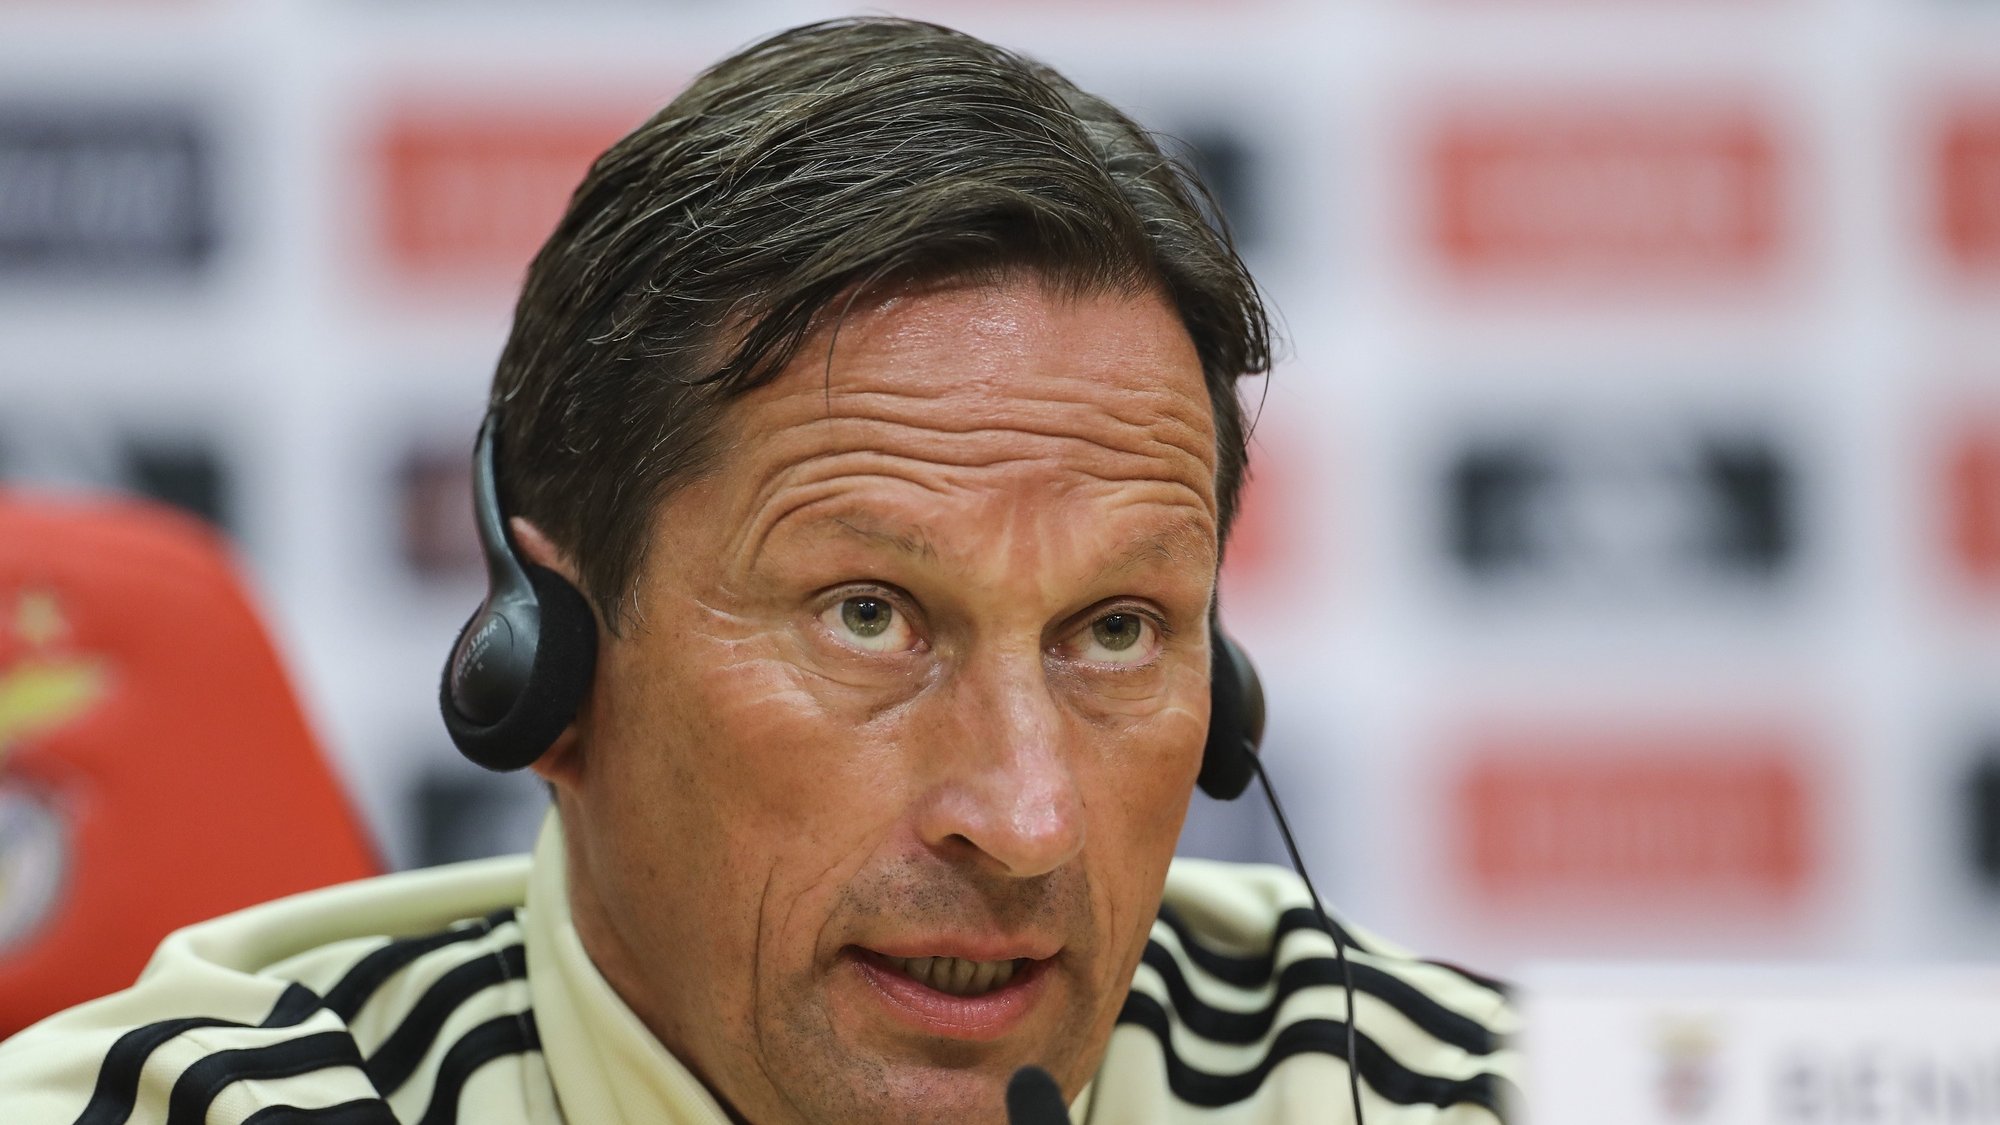 Benfica&#039;s head coach Roger Schmidt during a press conference at Benfica Training campus prior to tomorrow 2st leg of the UEFA Champions League 3rd qualifying round against FC Midtjylland, Seixal, Portugal, 8 of August 2022. MIGUEL A. LOPES/LUSA